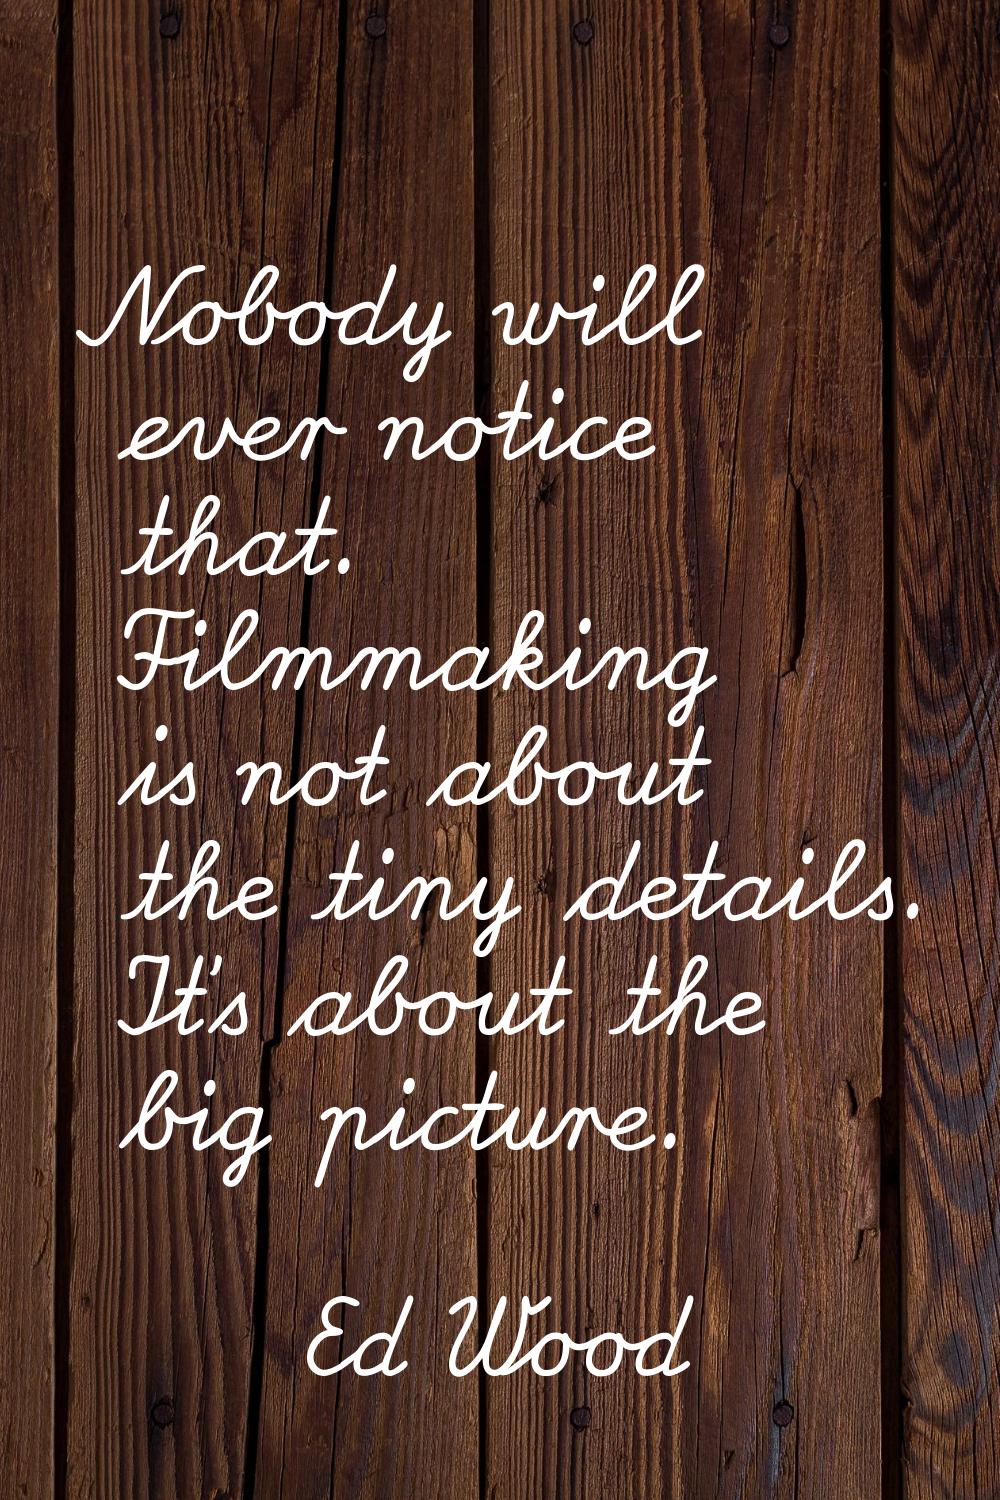 Nobody will ever notice that. Filmmaking is not about the tiny details. It's about the big picture.